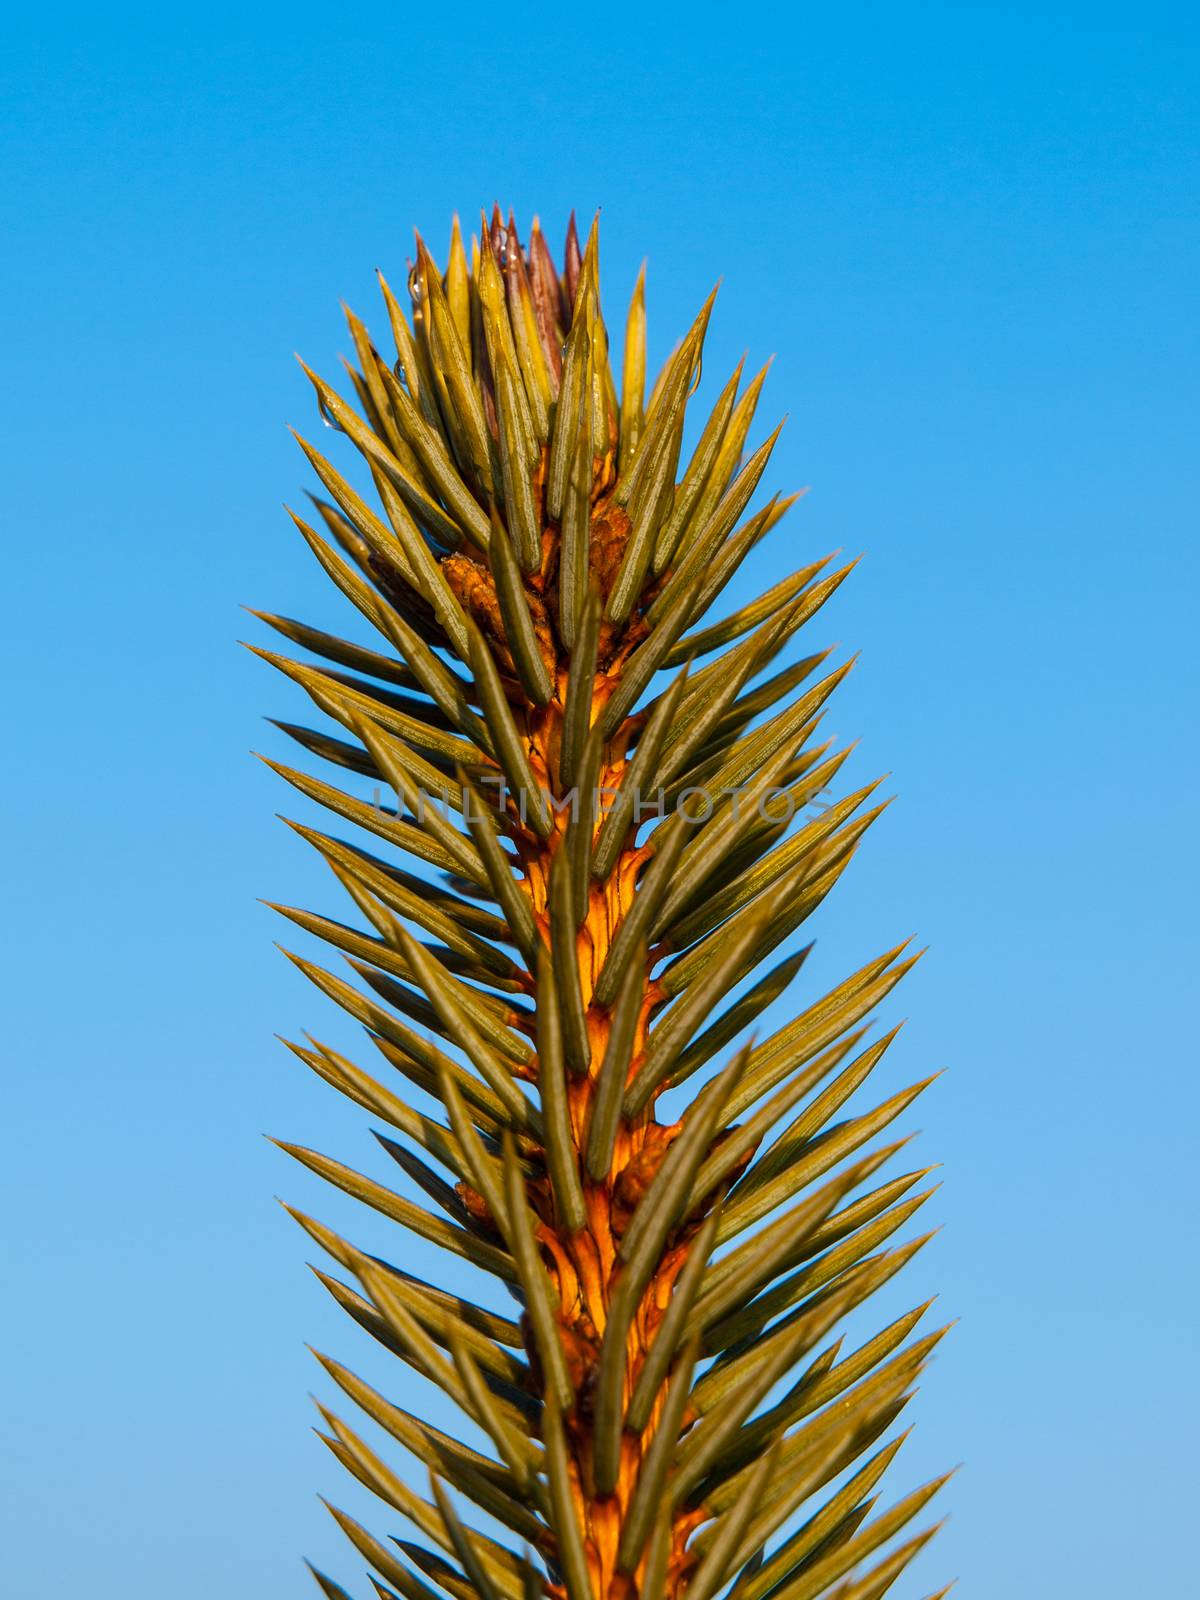 Spruce tip with needles on blue sky background